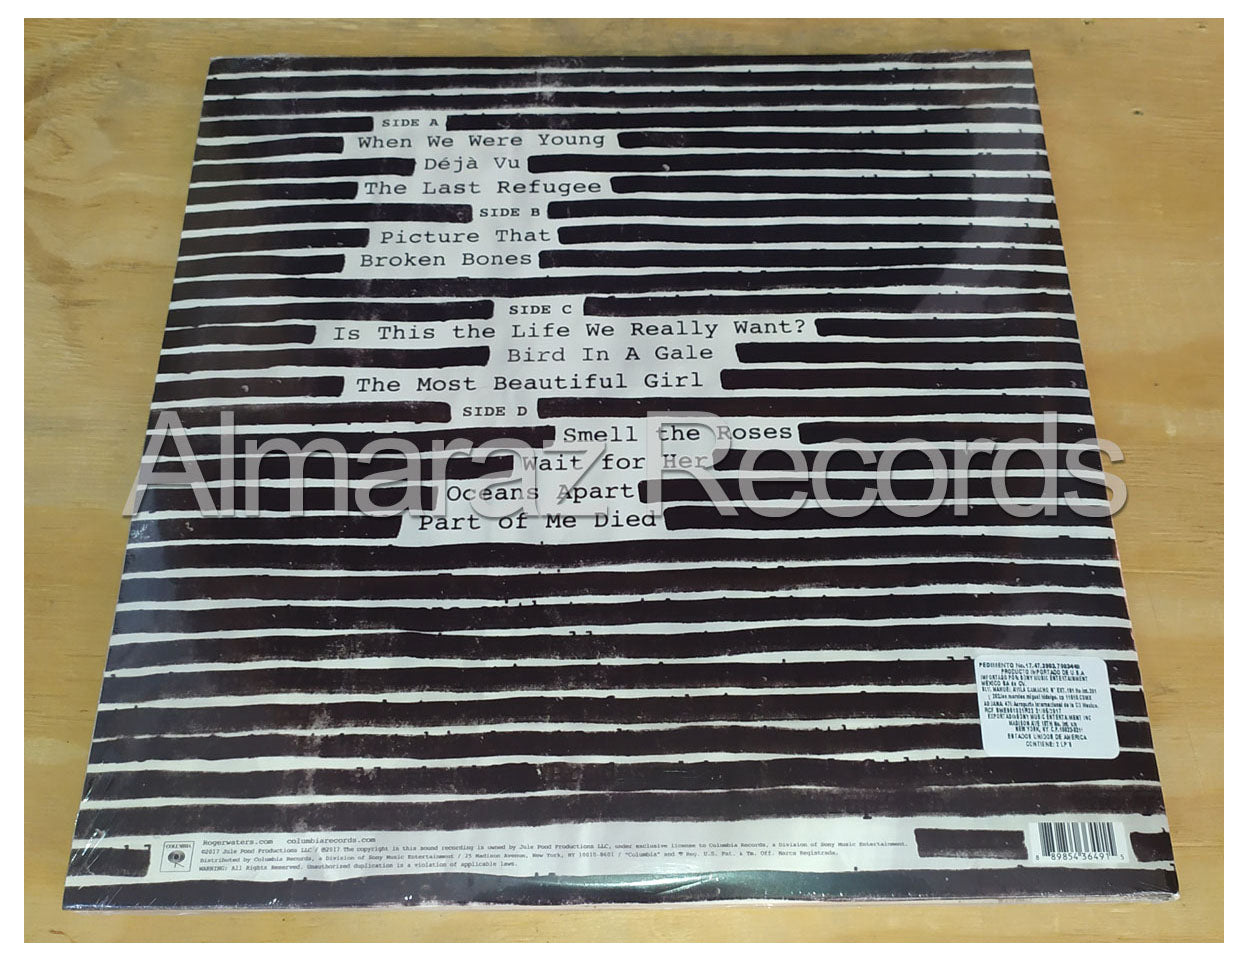 Roger Waters Is This The Life We Really Want? Vinyl LP